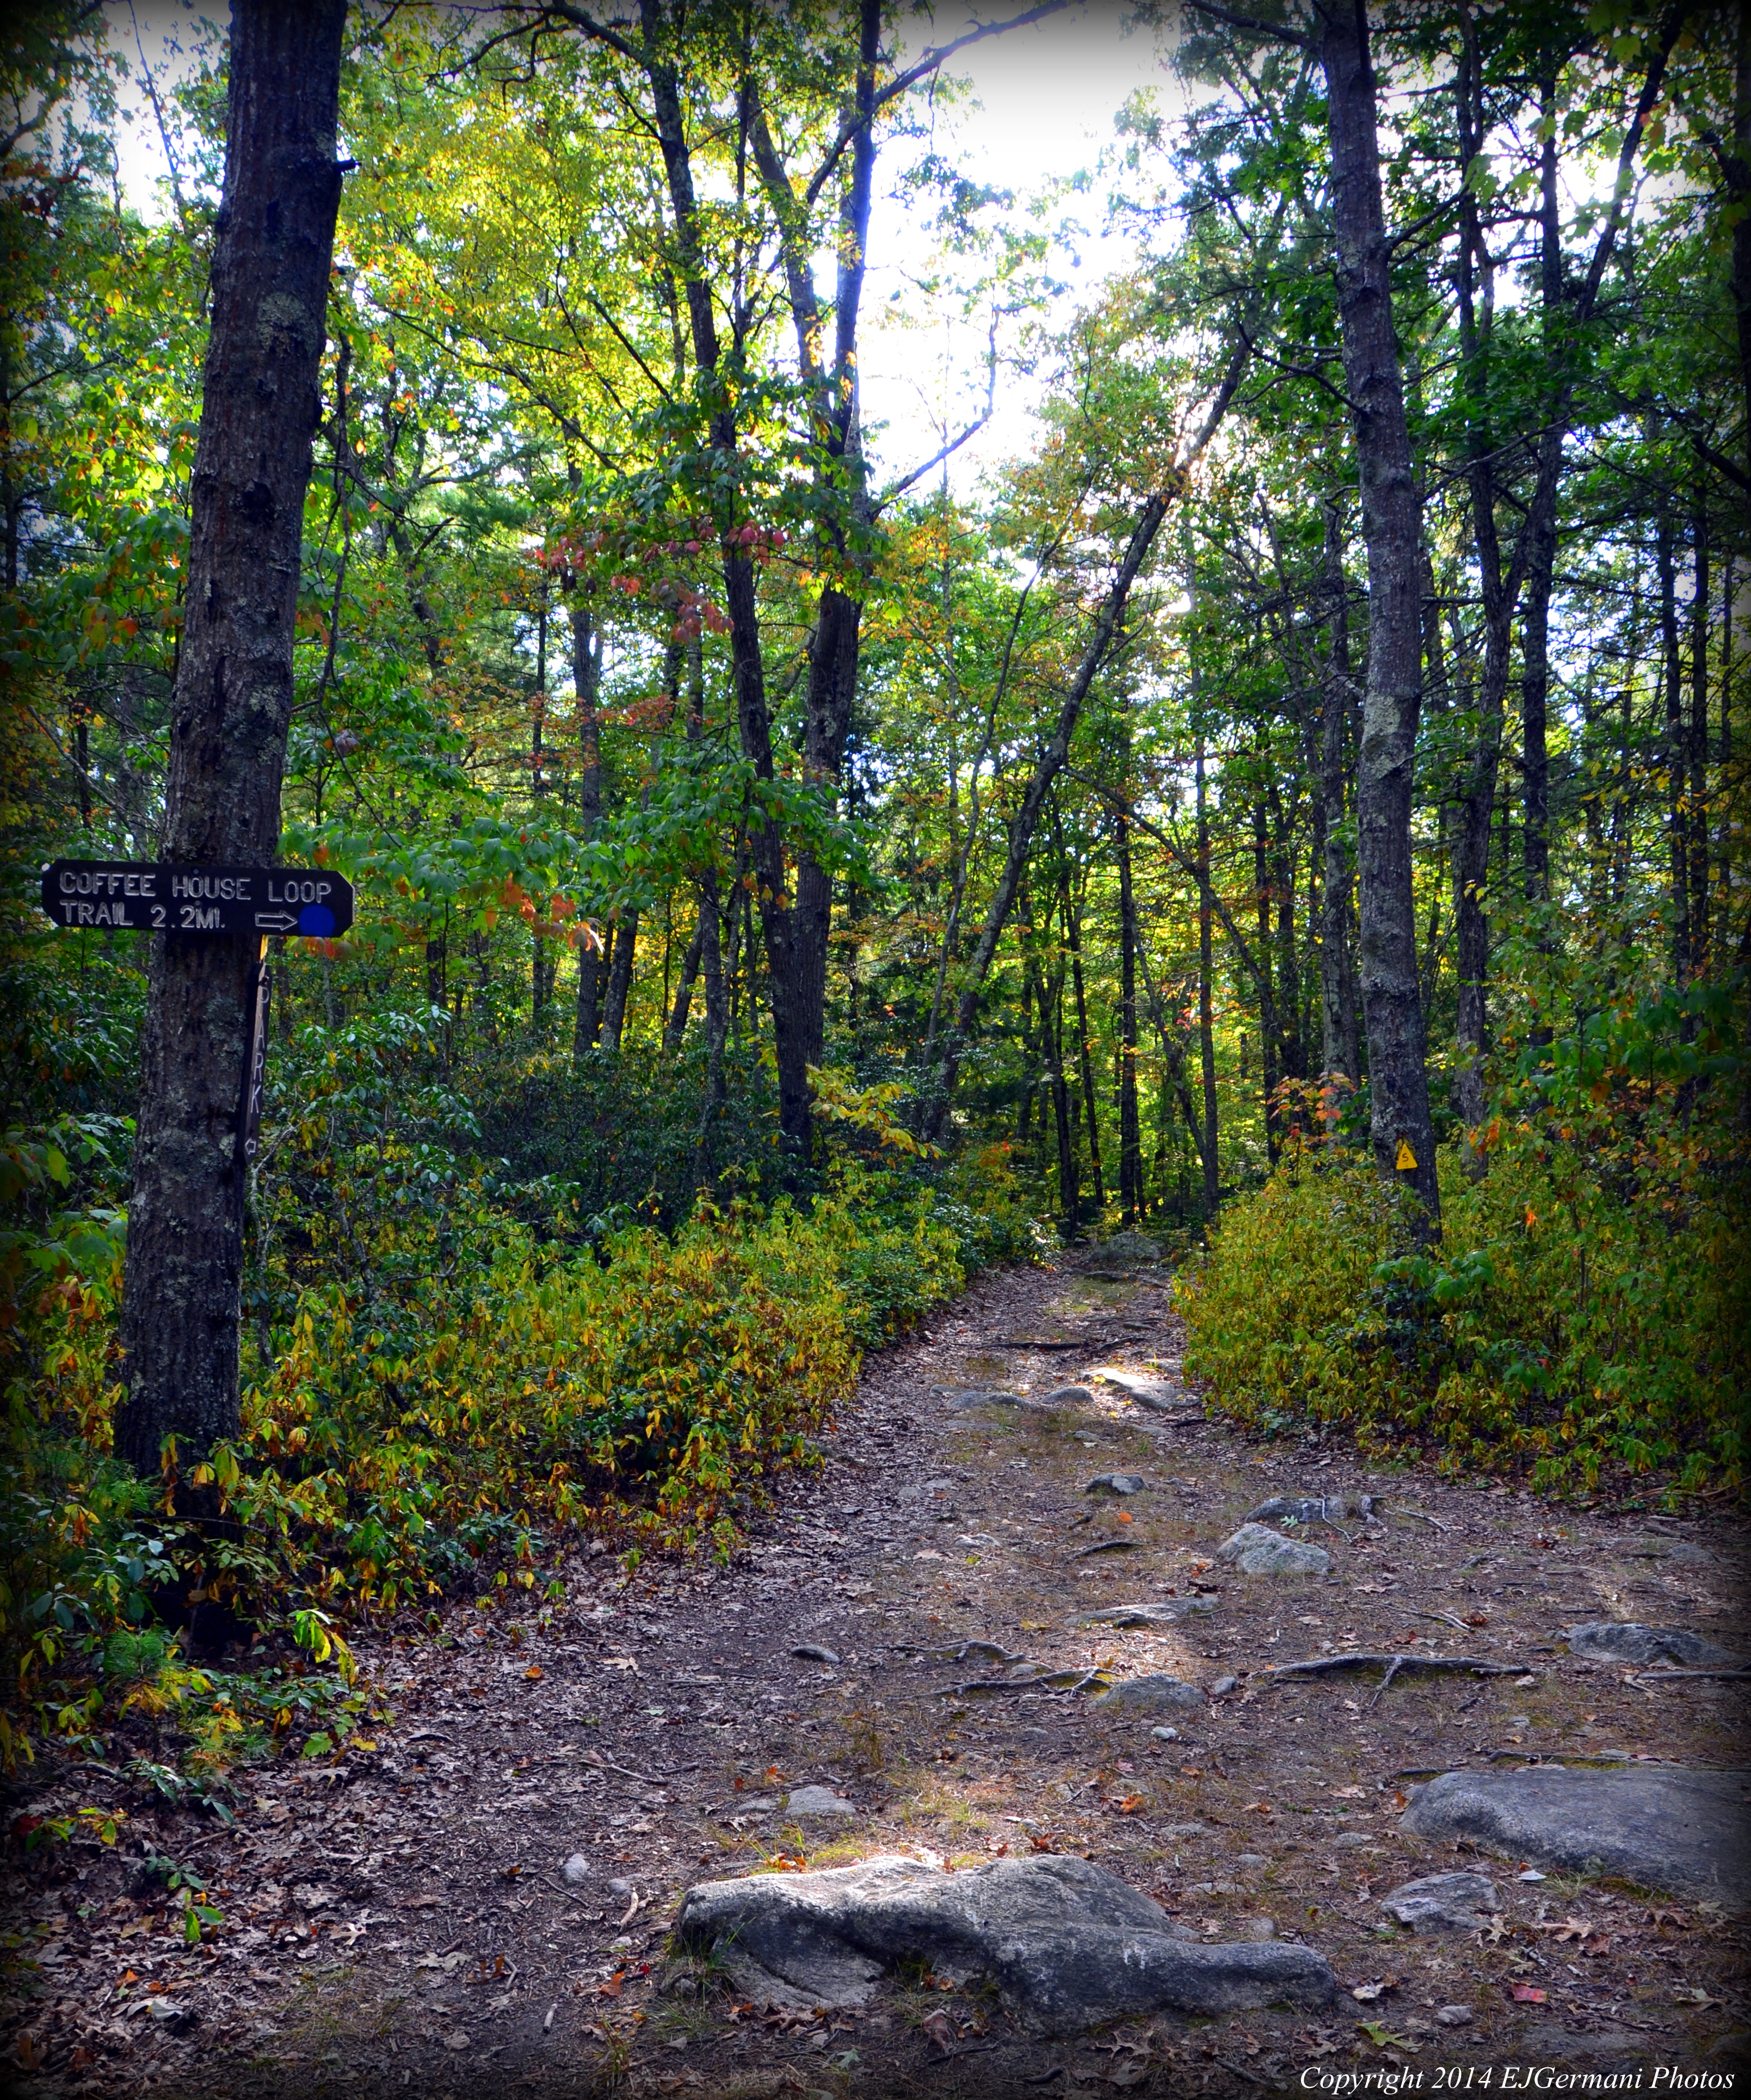 Where The Coffee House Loop Meets The Mid-State Trail